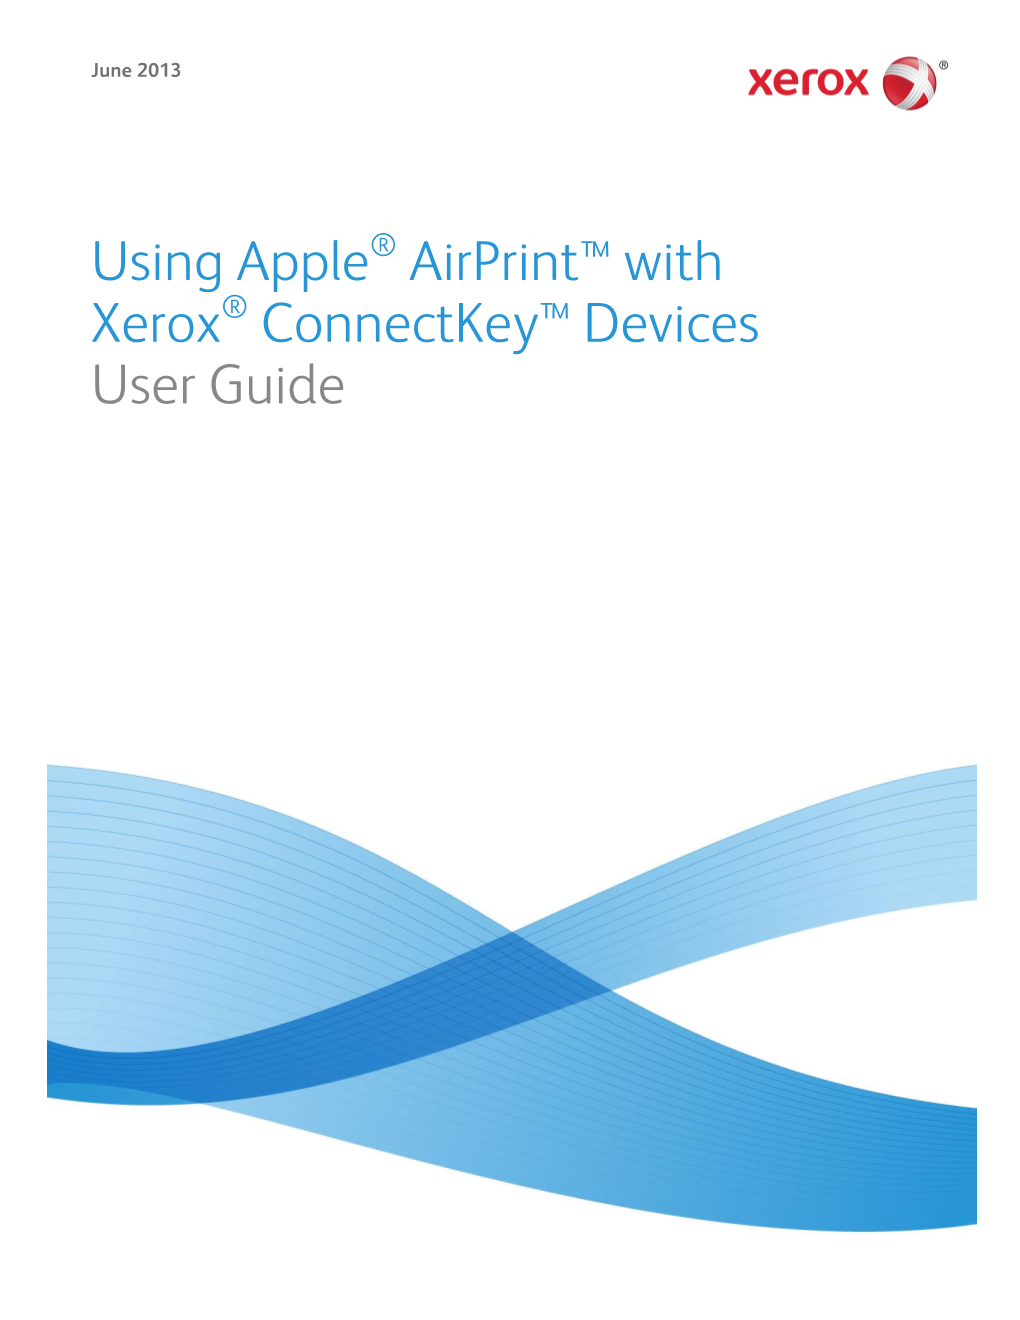 Using Apple Airprint™ with Xerox Connectkey™ Devices User Guide